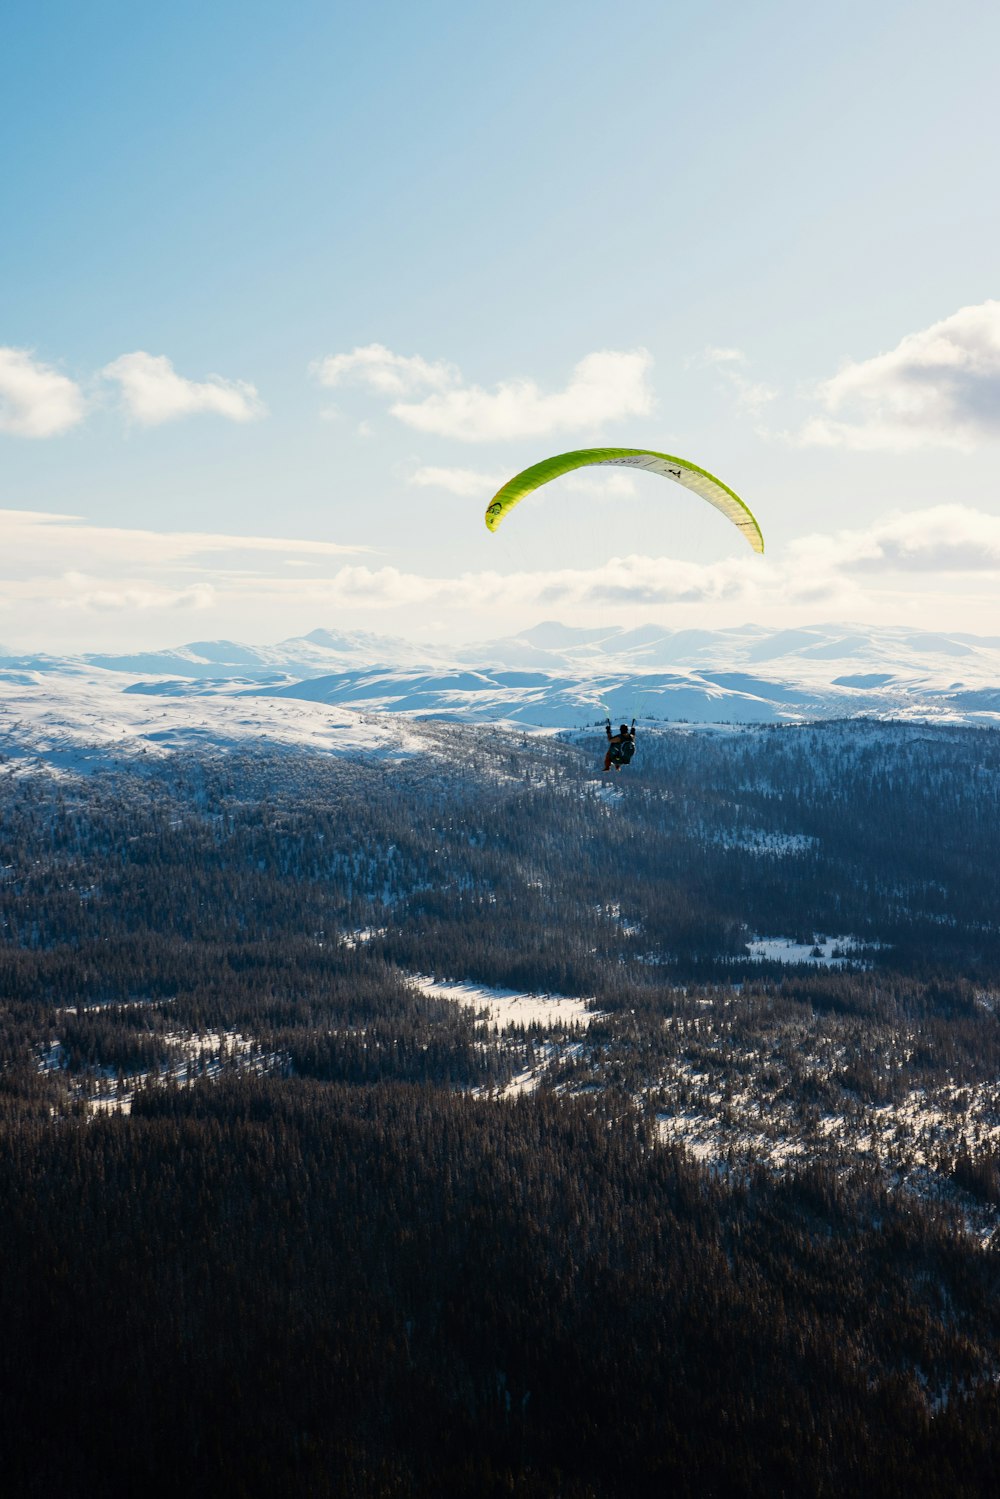 a person is parasailing over a snowy mountain